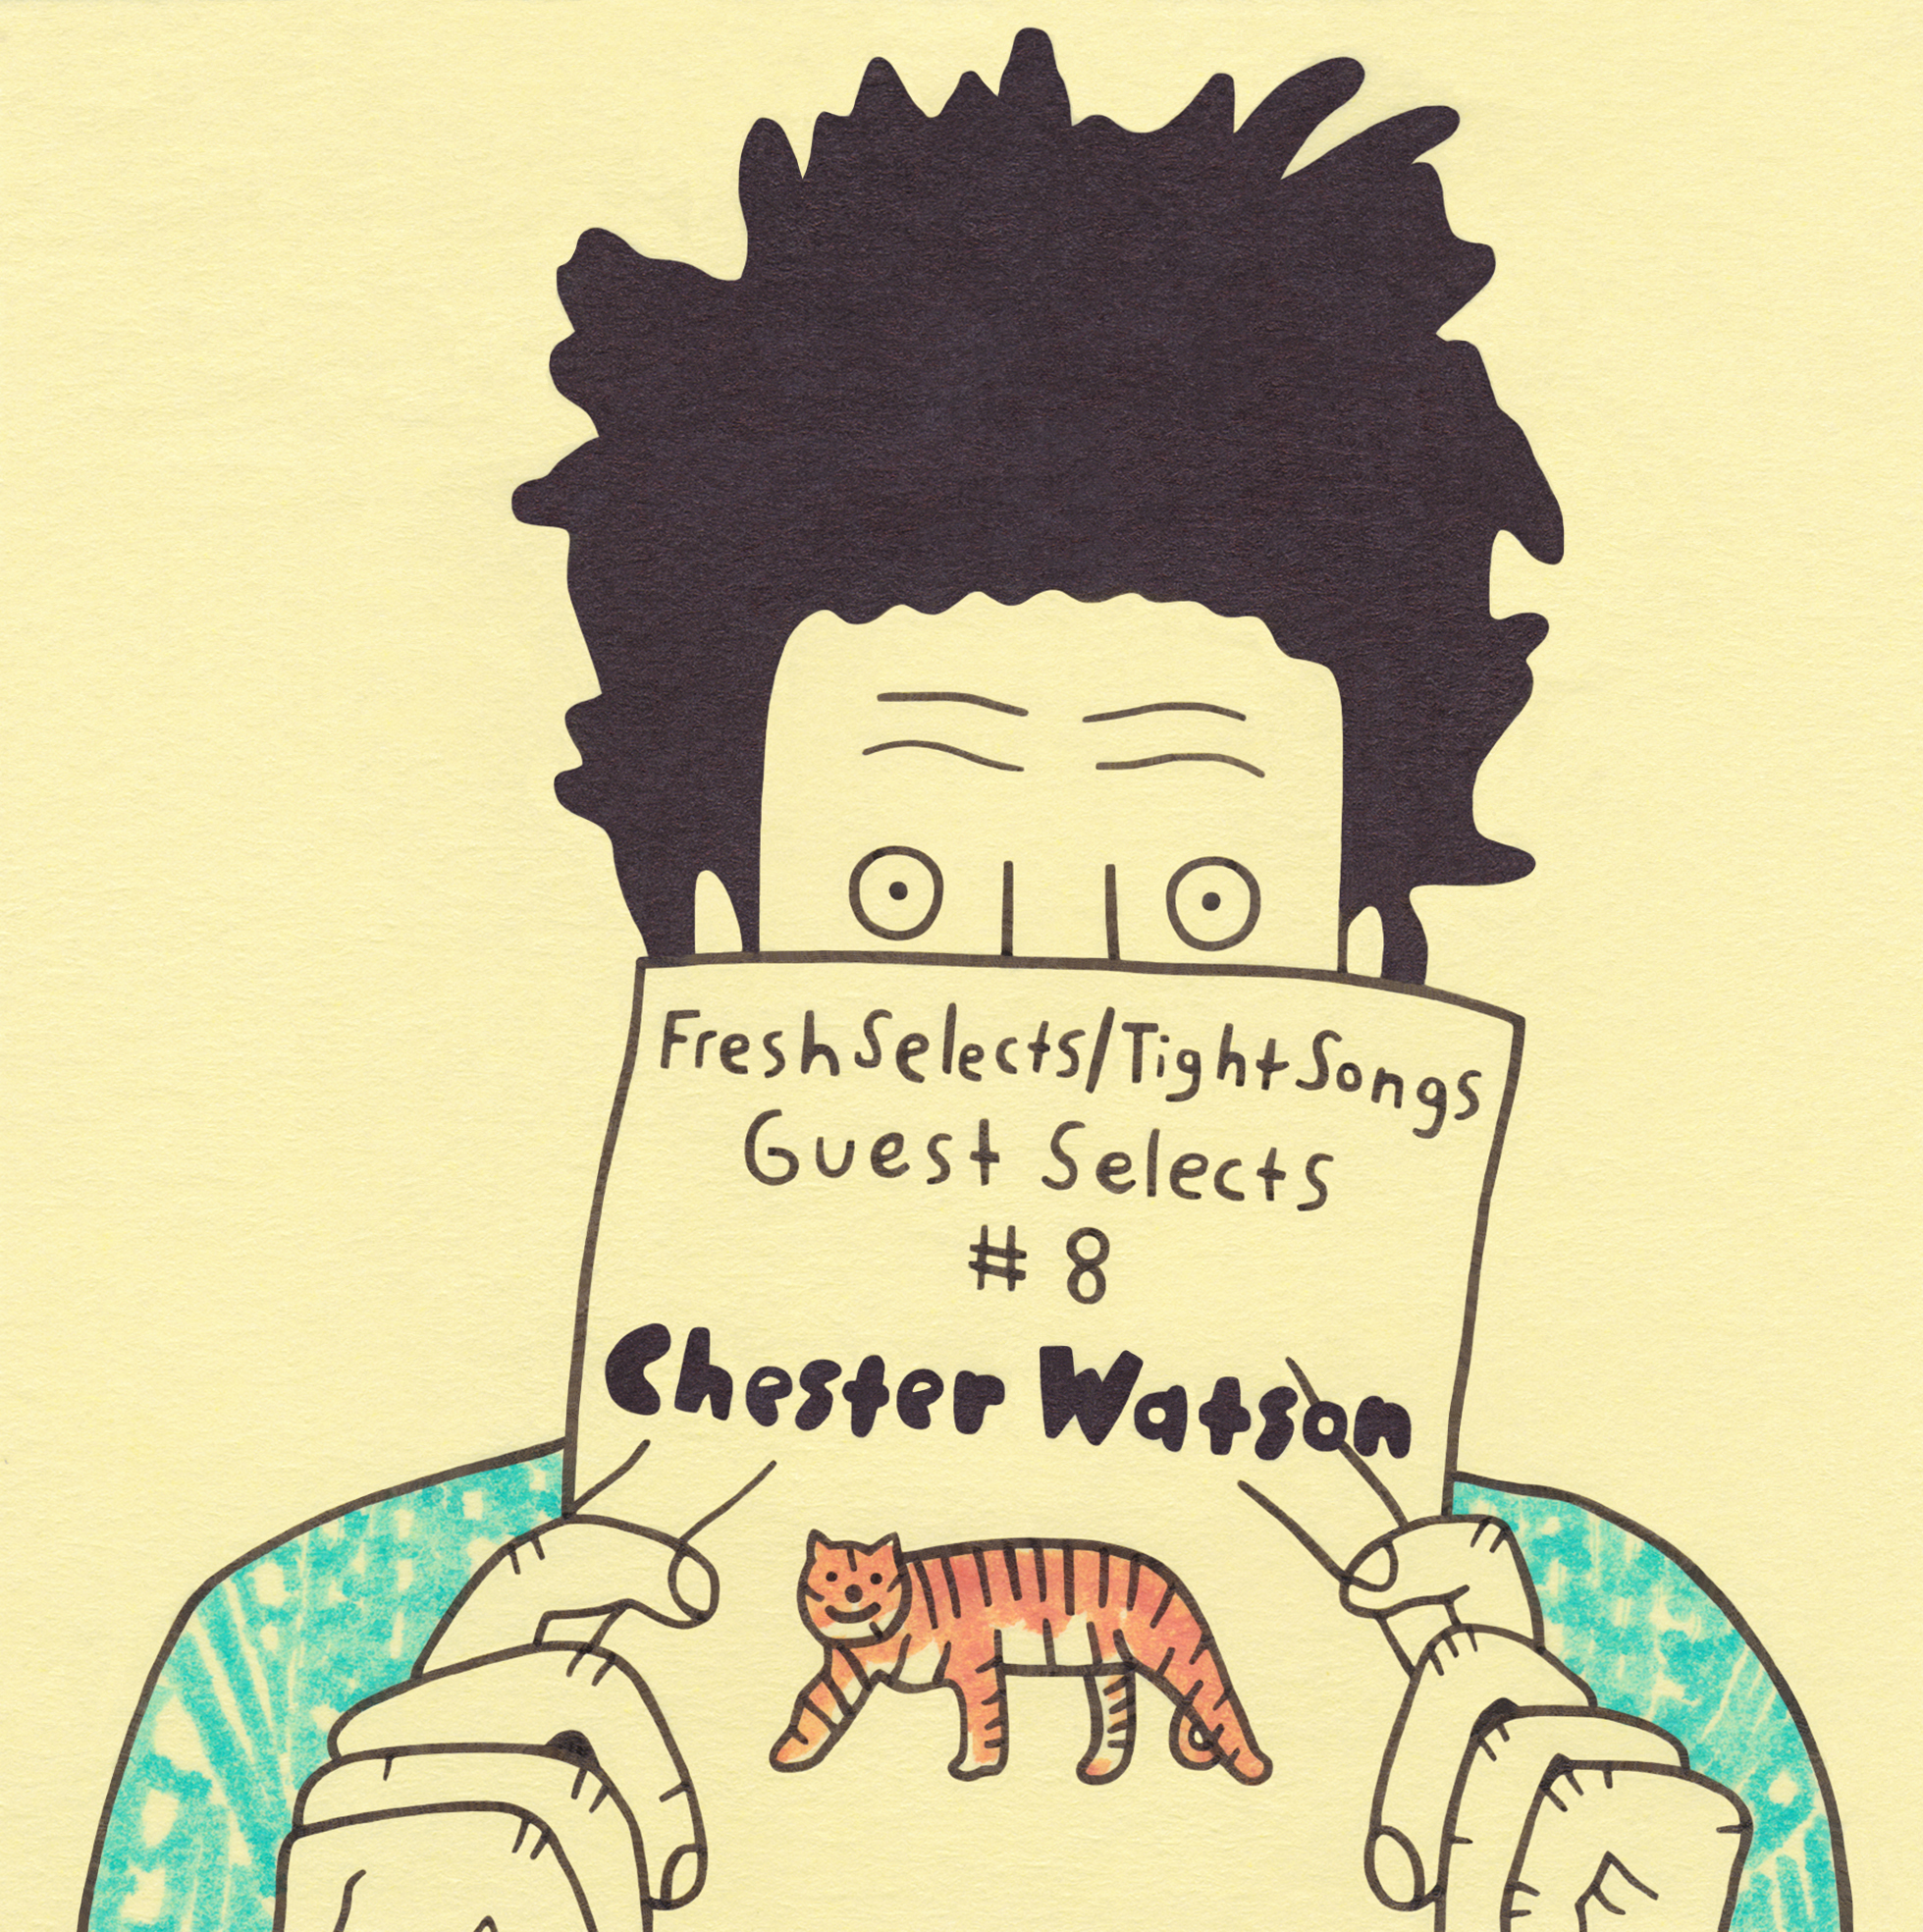 Fresh Selects / Tight Songs – Guest Selects #8: Chester Watson